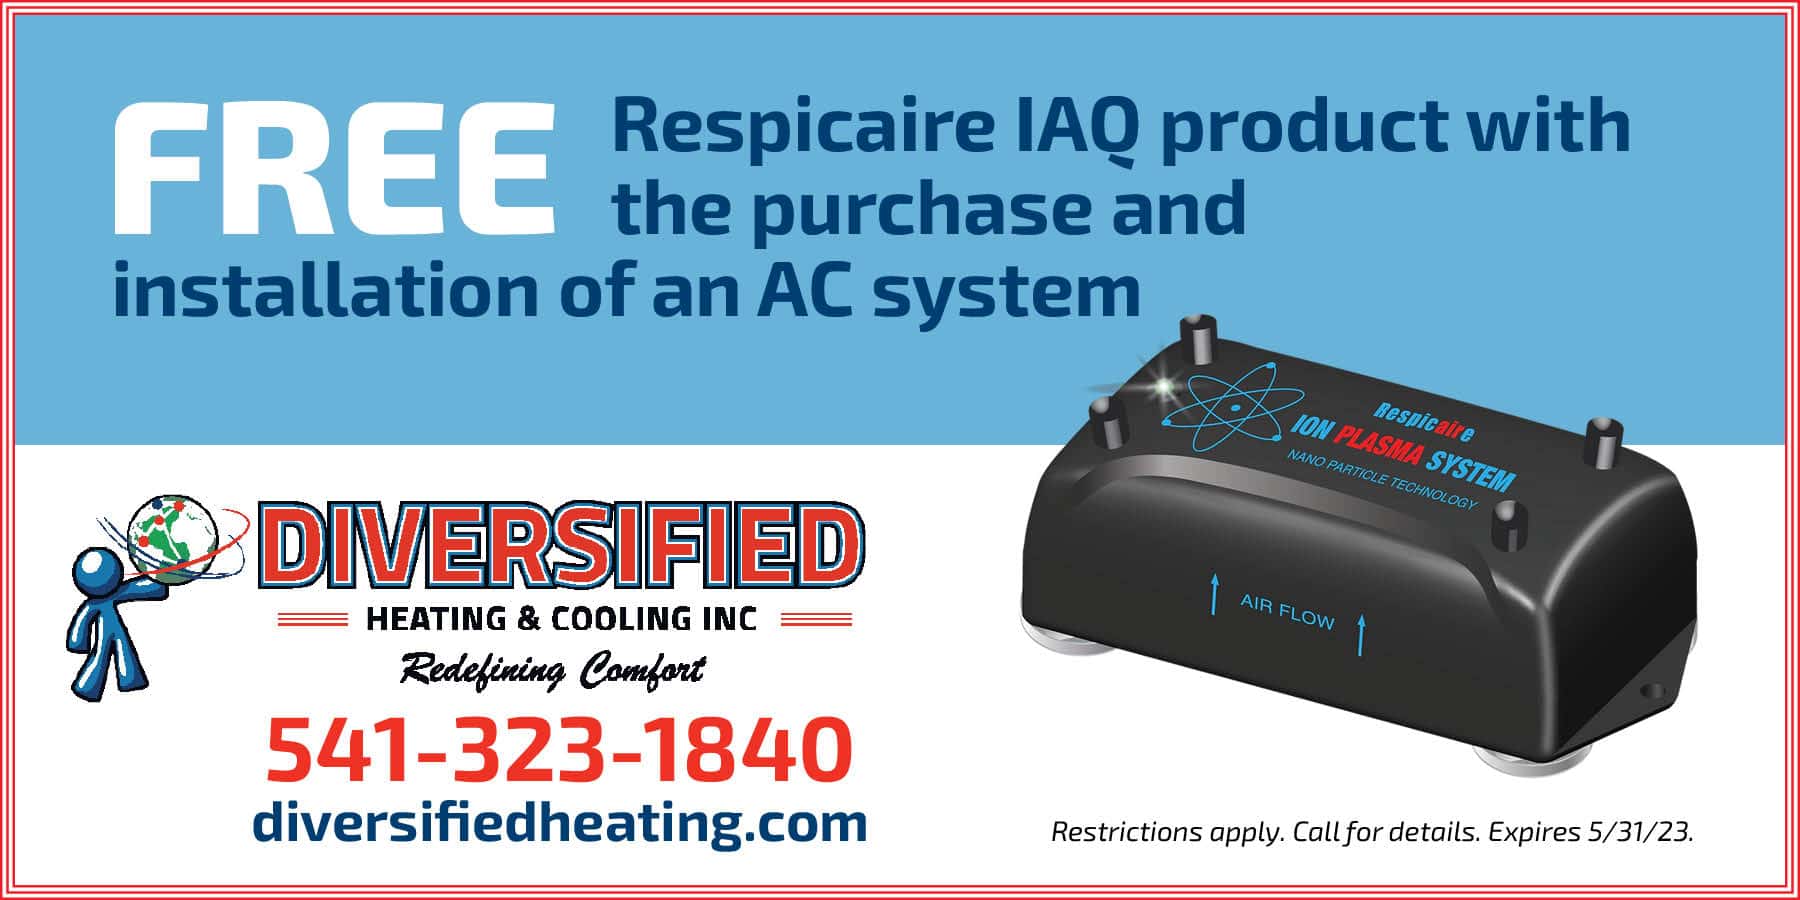 Free Respicaire IAQ product with the purchase and installation of an AC system